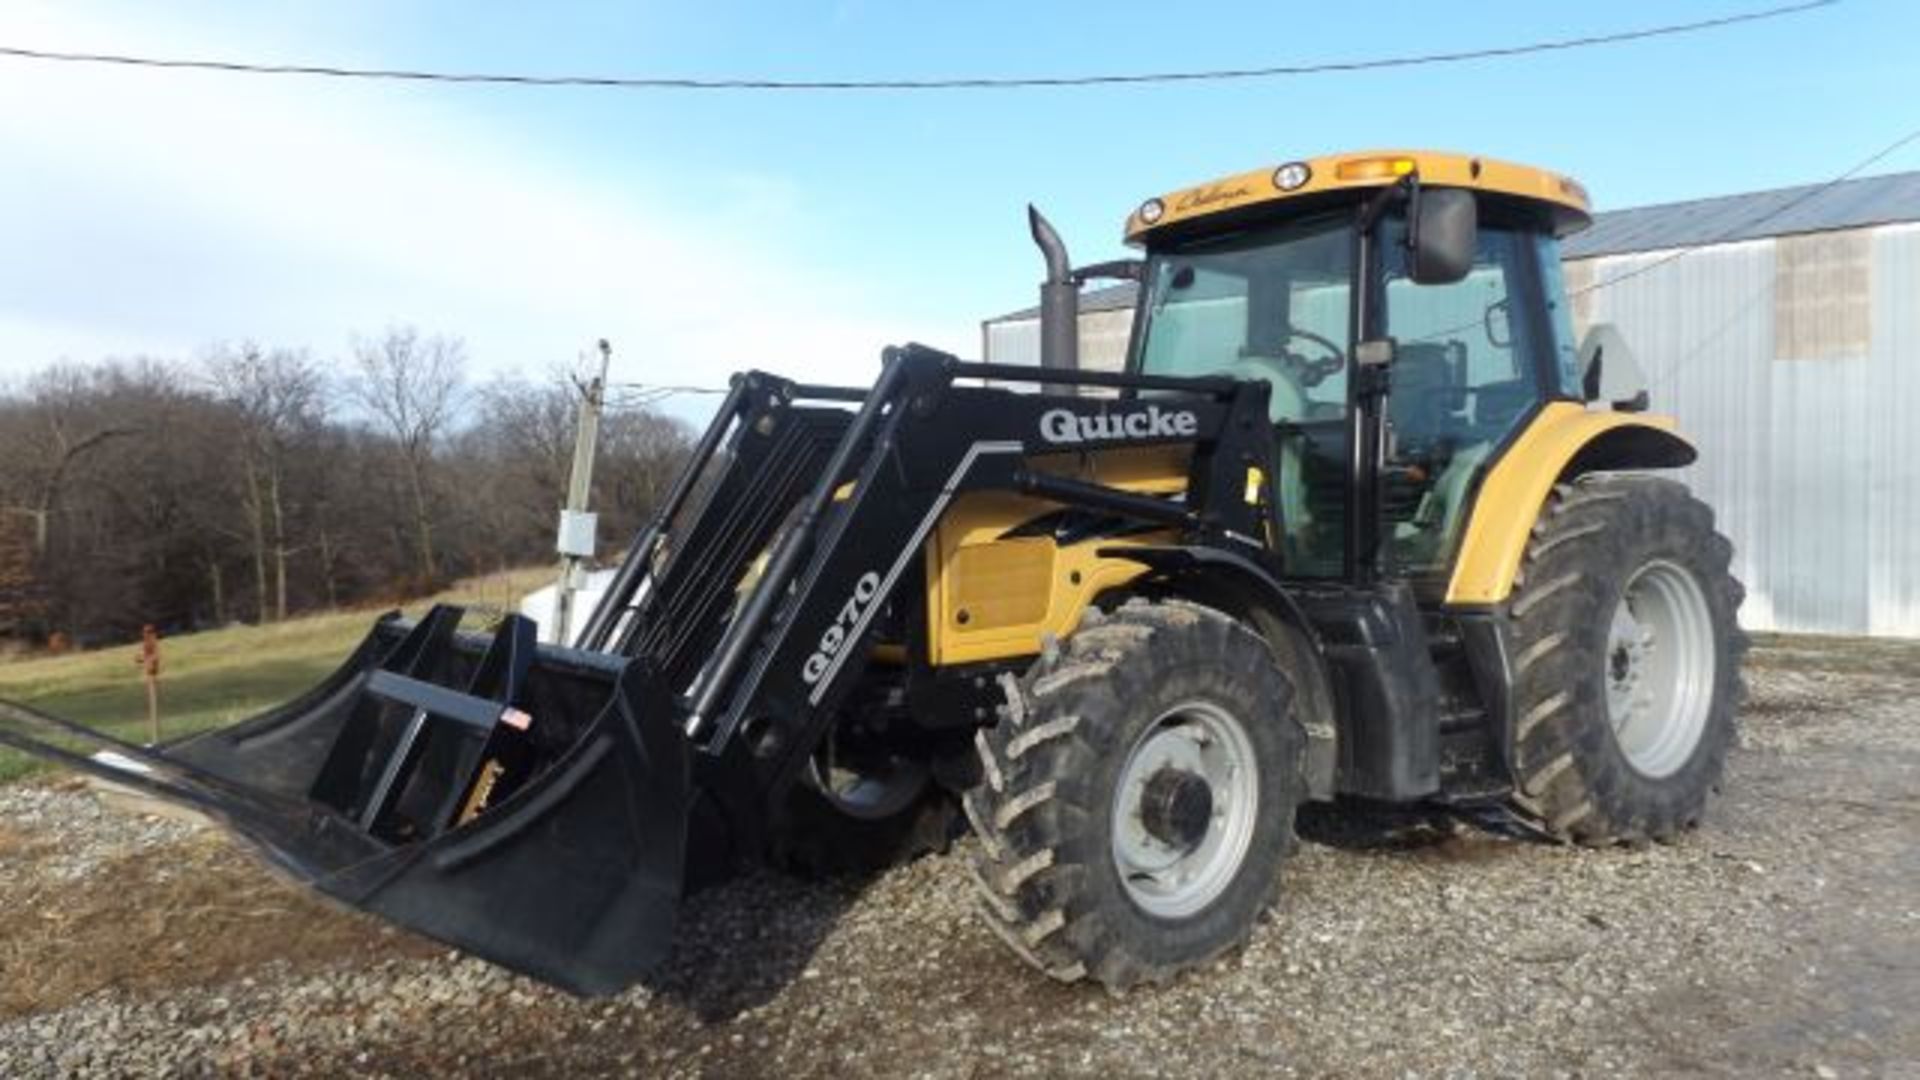 2004 AGCO Challenger MT525B Tractor, 4781 Hrs., Cab, MFWD, LHR, Partial Power Shift, 18.4R34 Rear,